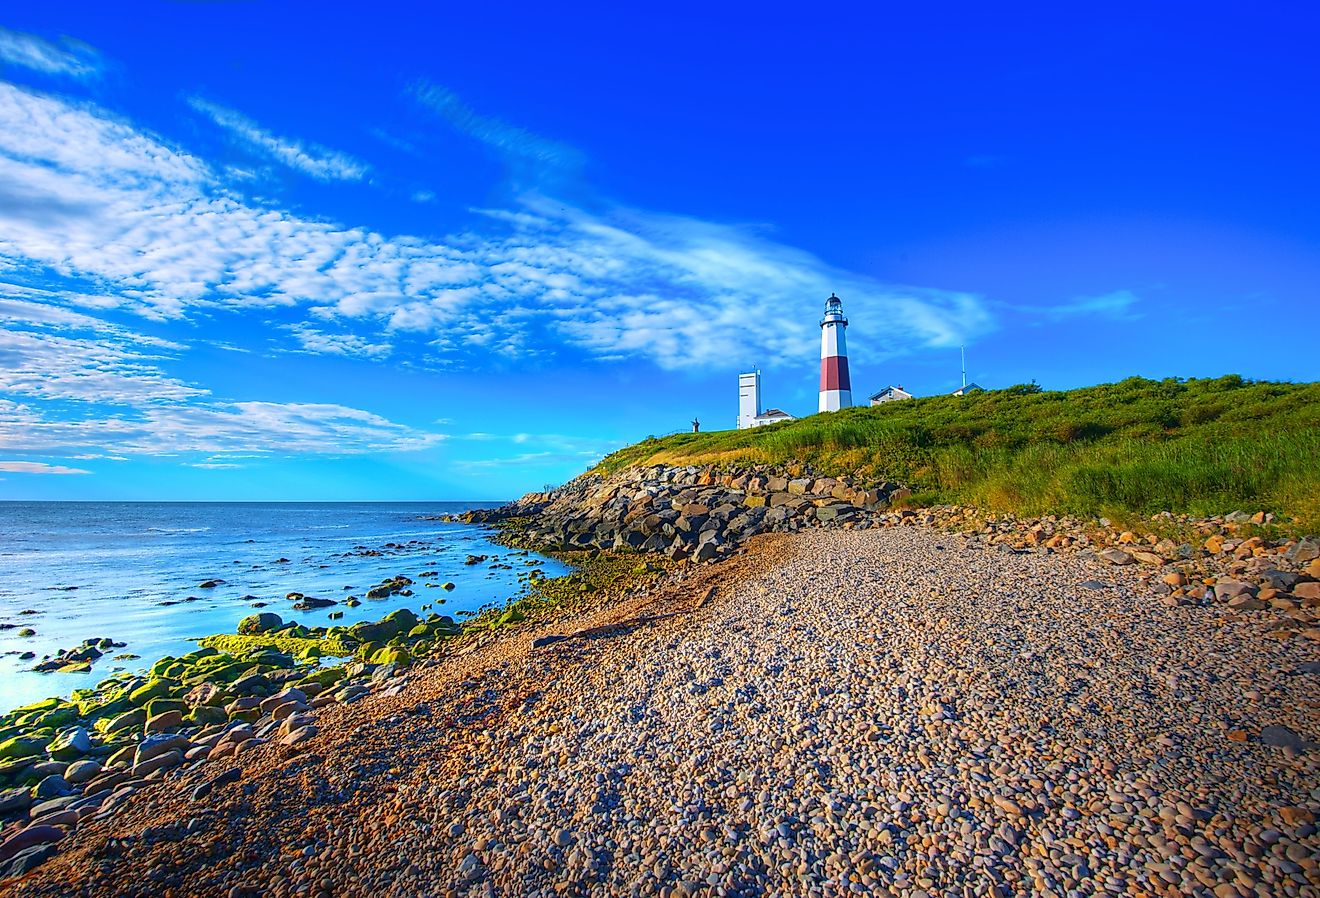 Lighthouse in Montauk Point, New York captured in early morning sun.